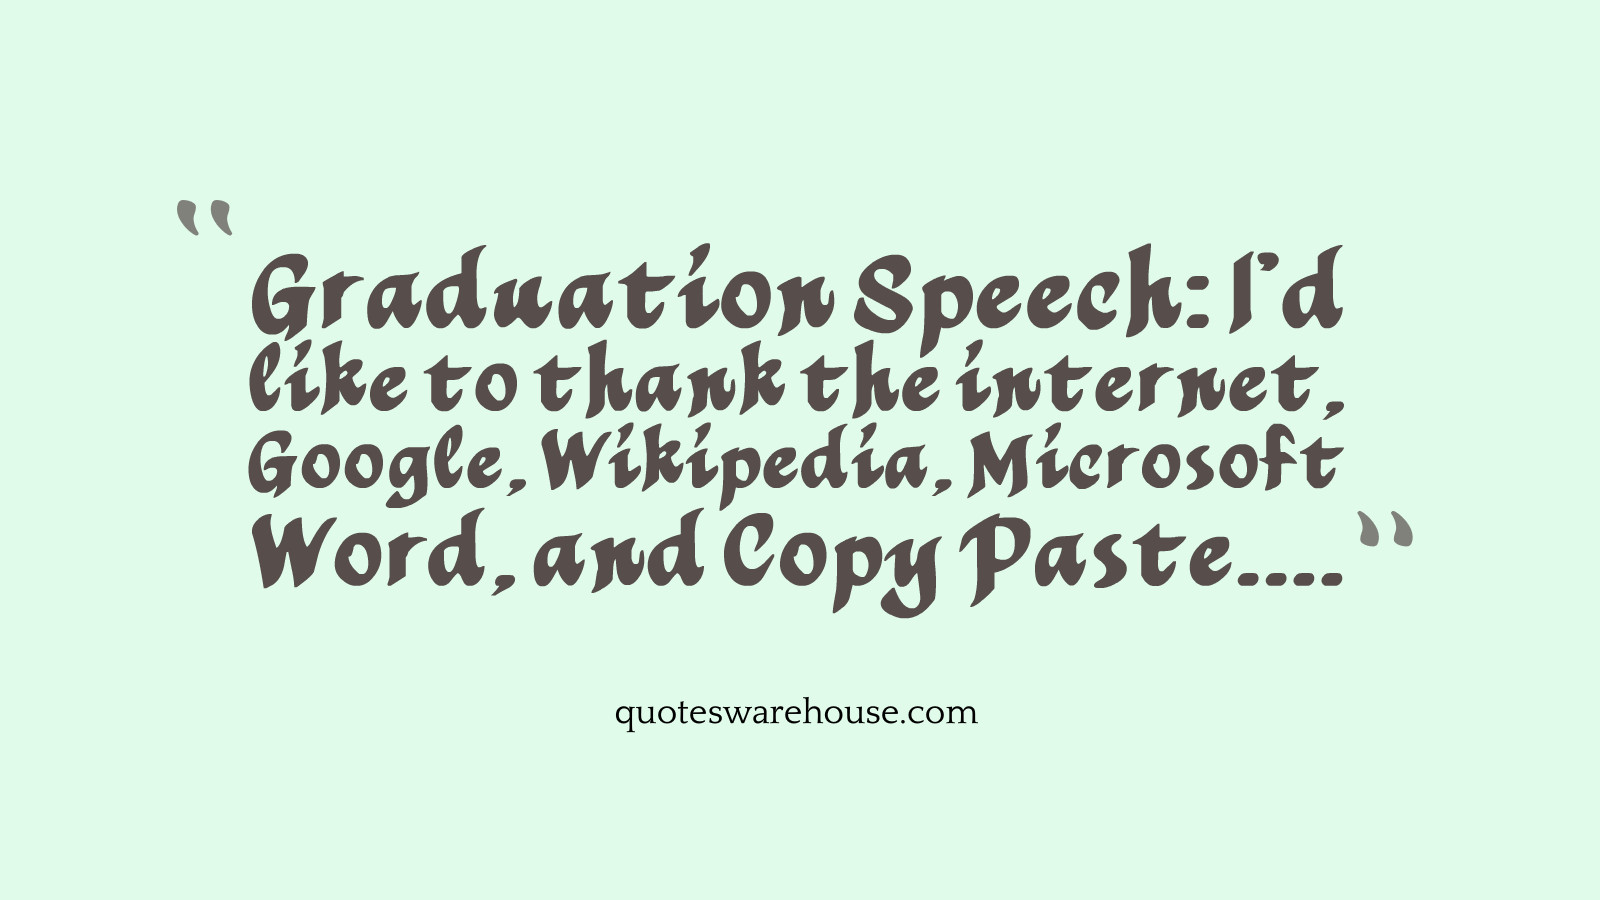 Quotes For Graduation Speech
 Funny Graduation Quotes We Need Fun